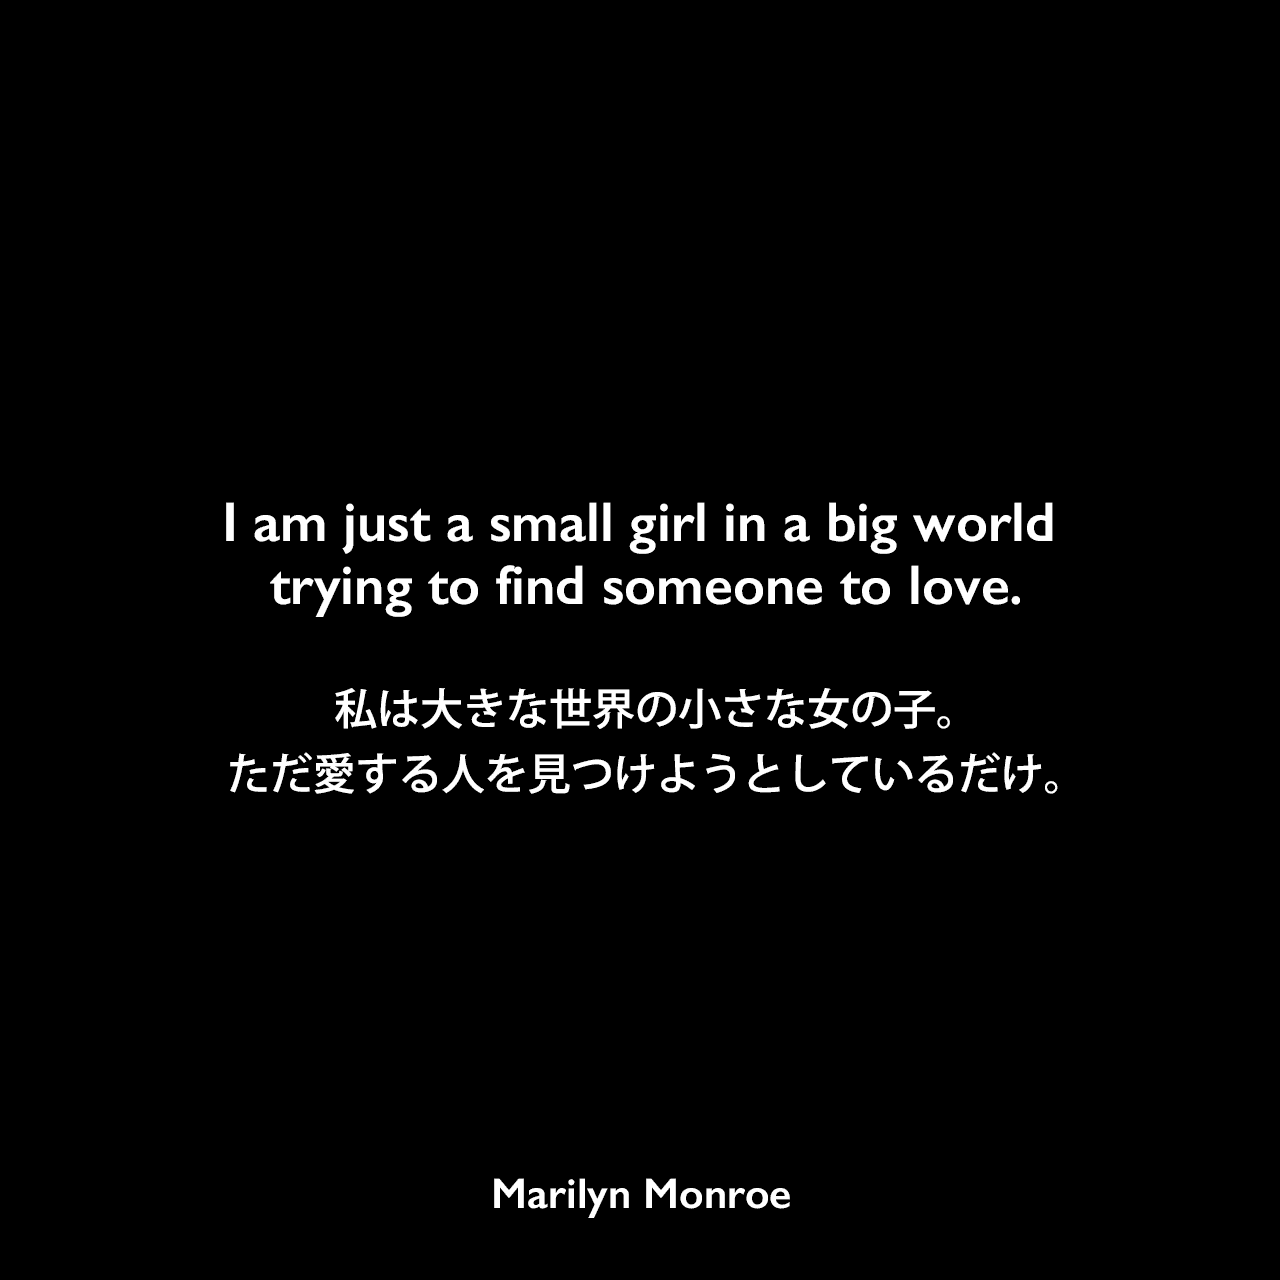 I am just a small girl in a big world trying to find someone to love.私は大きな世界の小さな女の子。ただ愛する人を見つけようとしているだけ。Marilyn Monroe